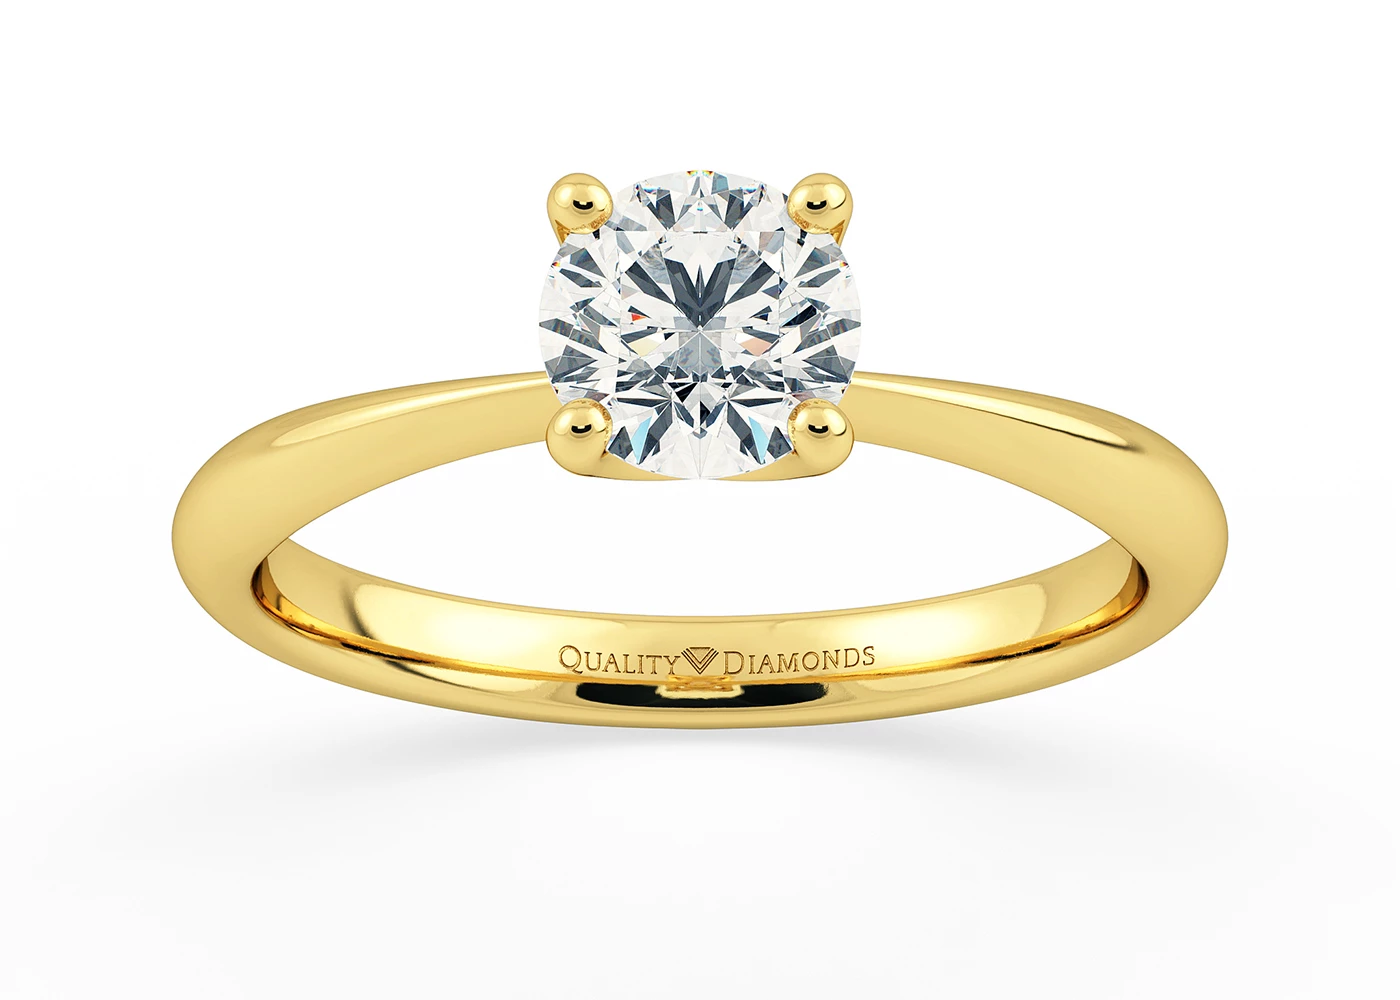 One Carat Round Brilliant Solitaire Diamond Engagement Ring in 18K Yellow Gold